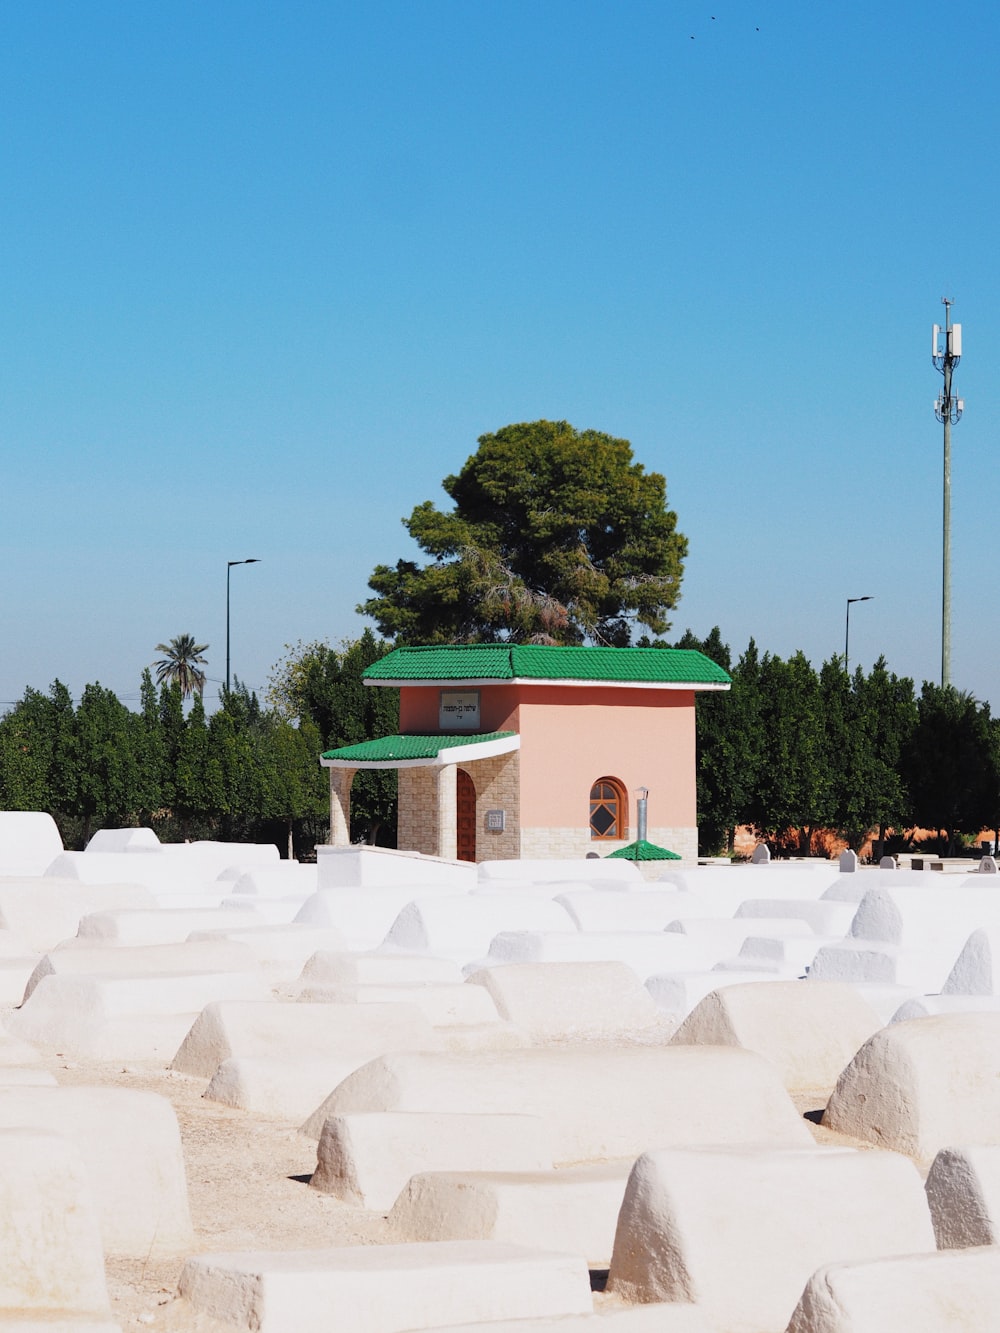 a building with a green roof surrounded by white sand